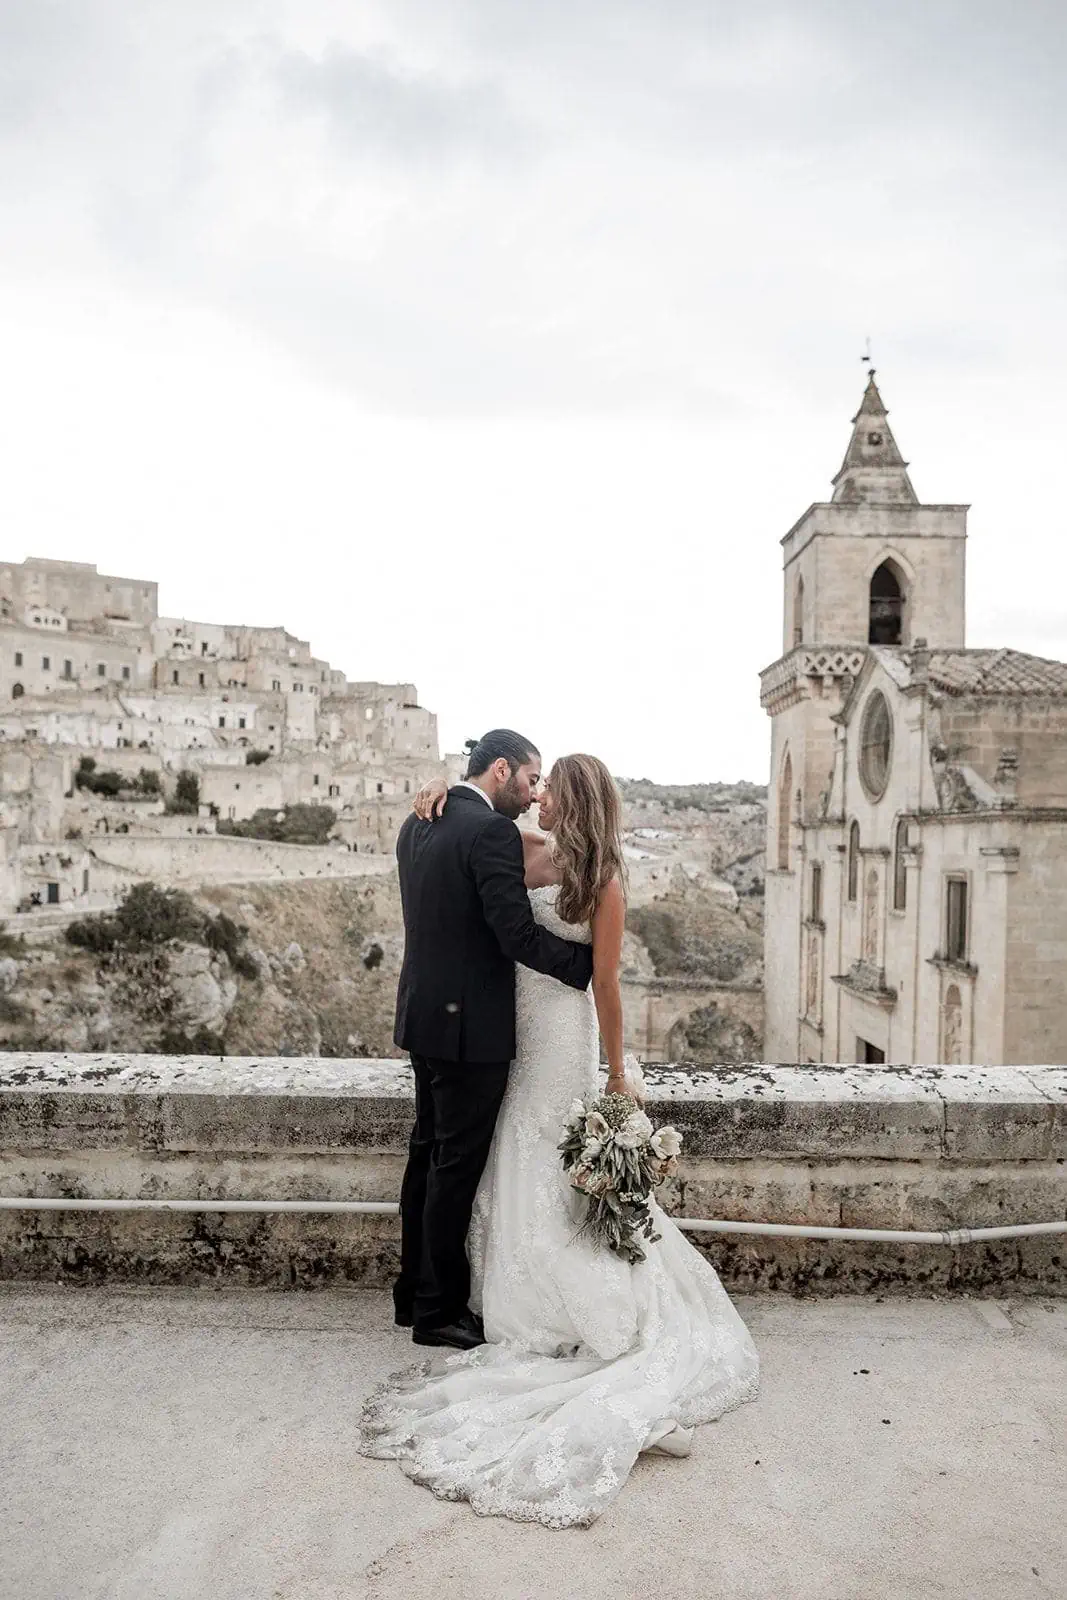 Bride and groom portrait outside in Matera Italy for elopement